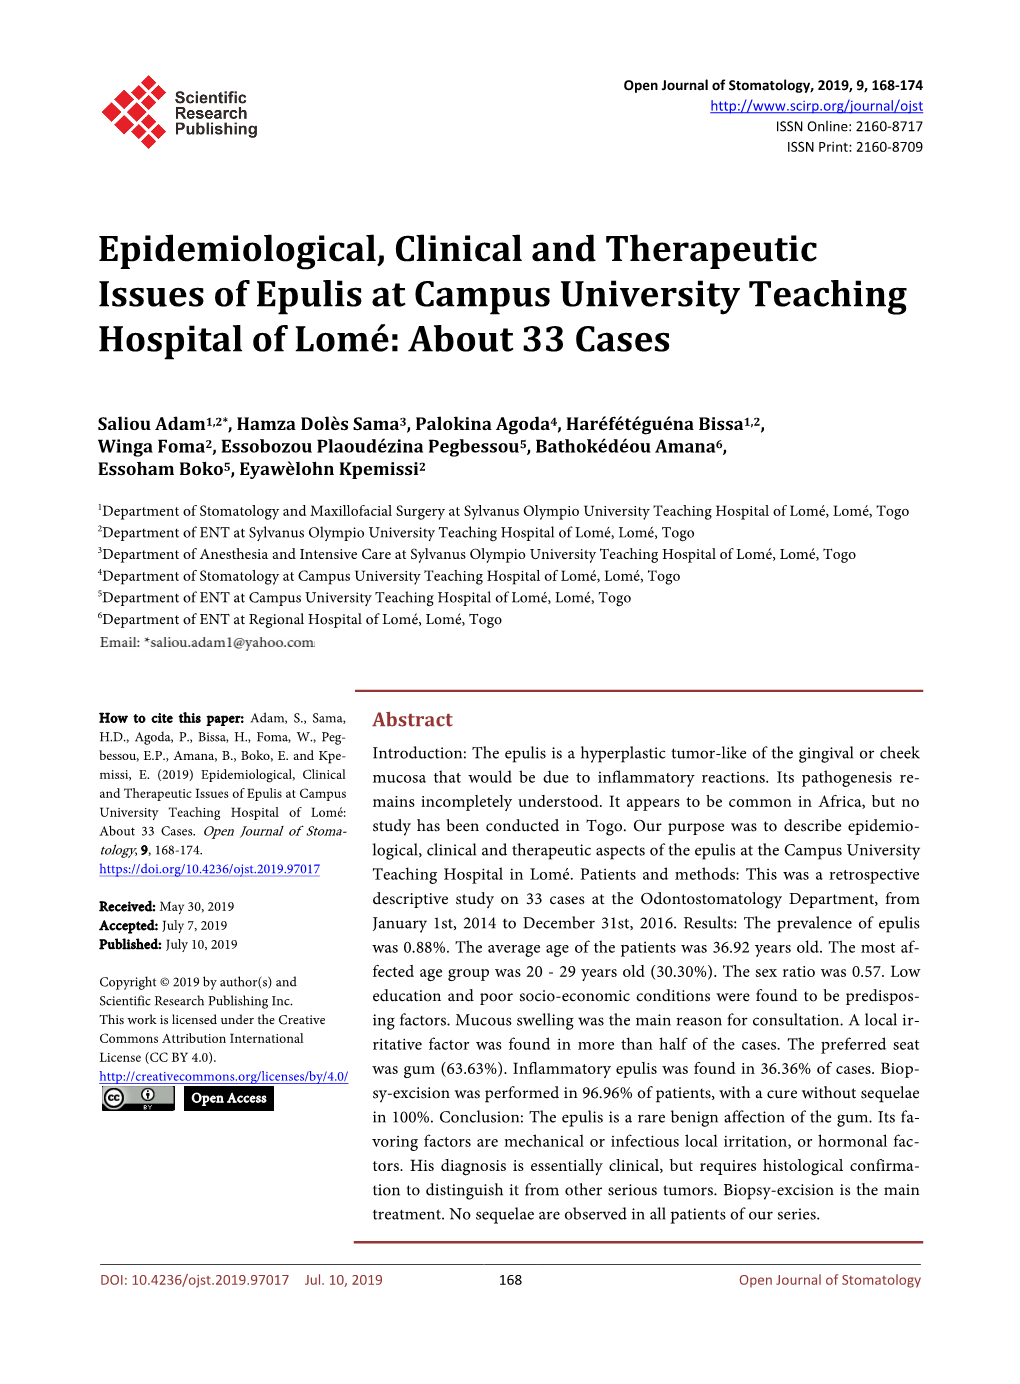 Epidemiological, Clinical and Therapeutic Issues of Epulis at Campus University Teaching Hospital of Lomé: About 33 Cases